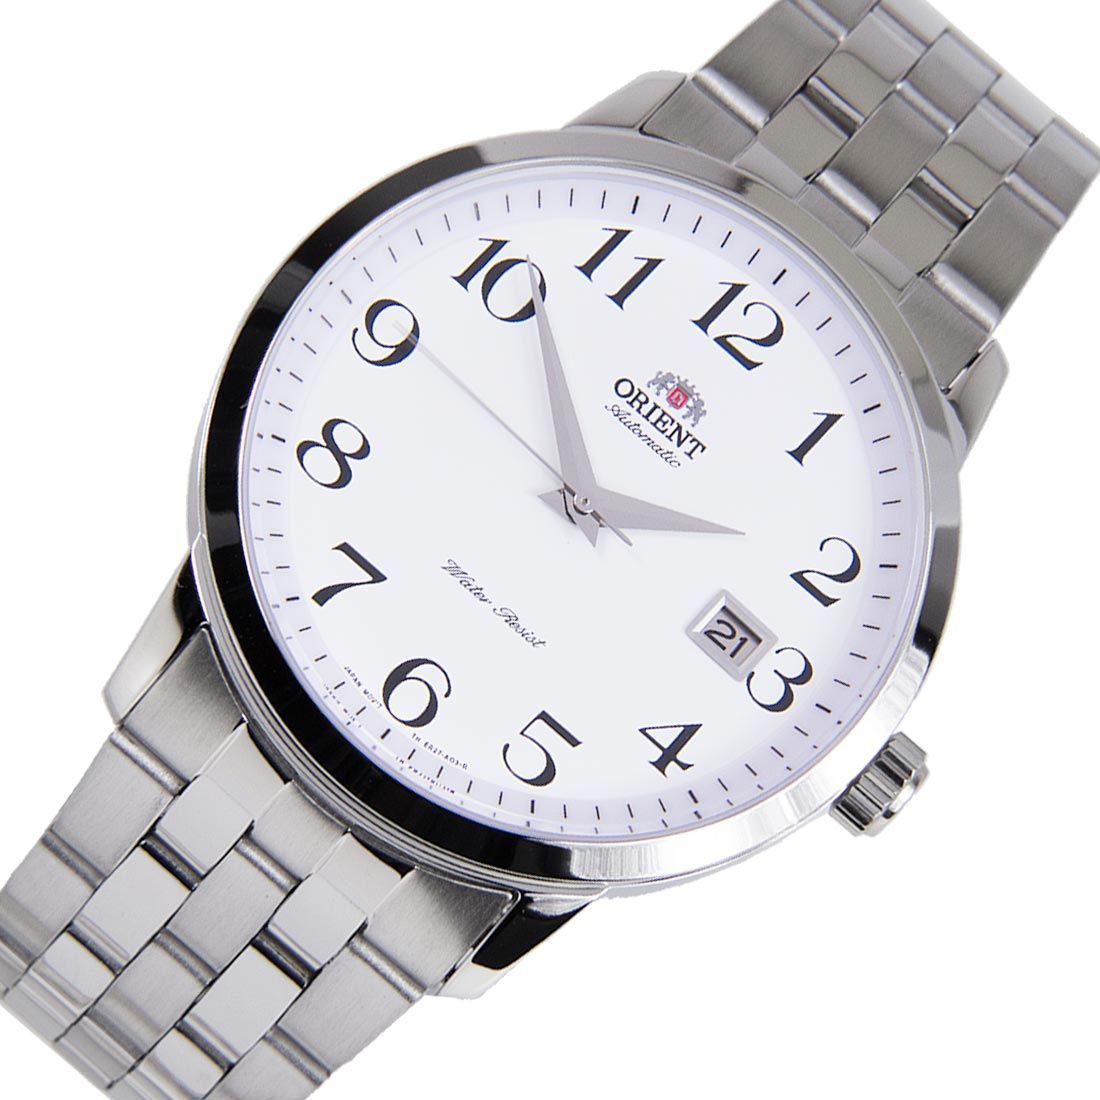 Orient FER2700DW0 ER2700DW Mechanical White Dial Mens Stainless Steel Watch -Orient